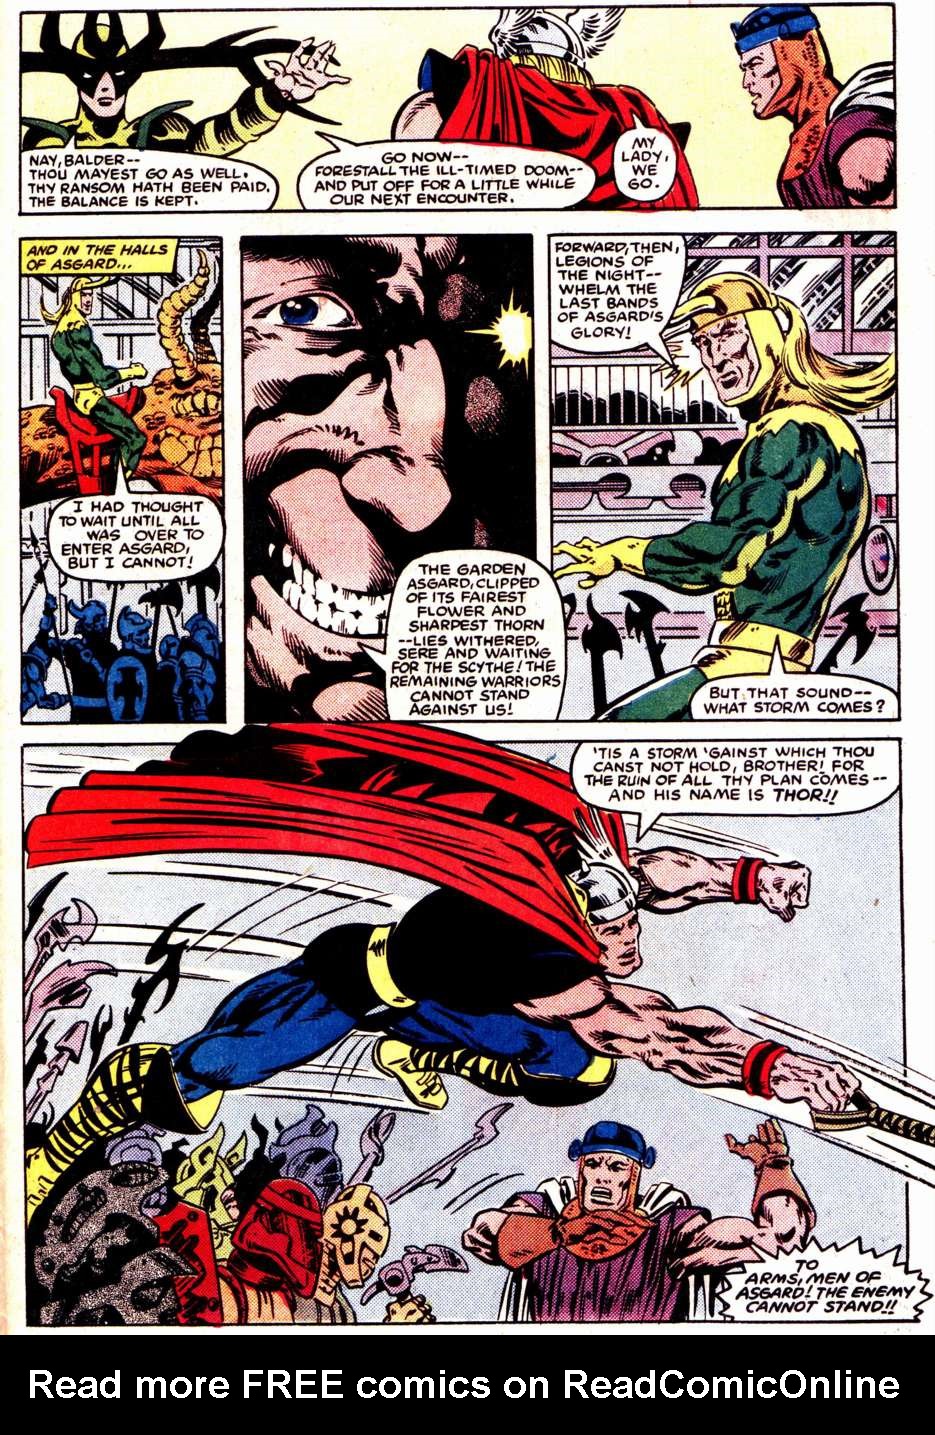 What If? (1977) issue 47 - Loki had found The hammer of Thor - Page 39